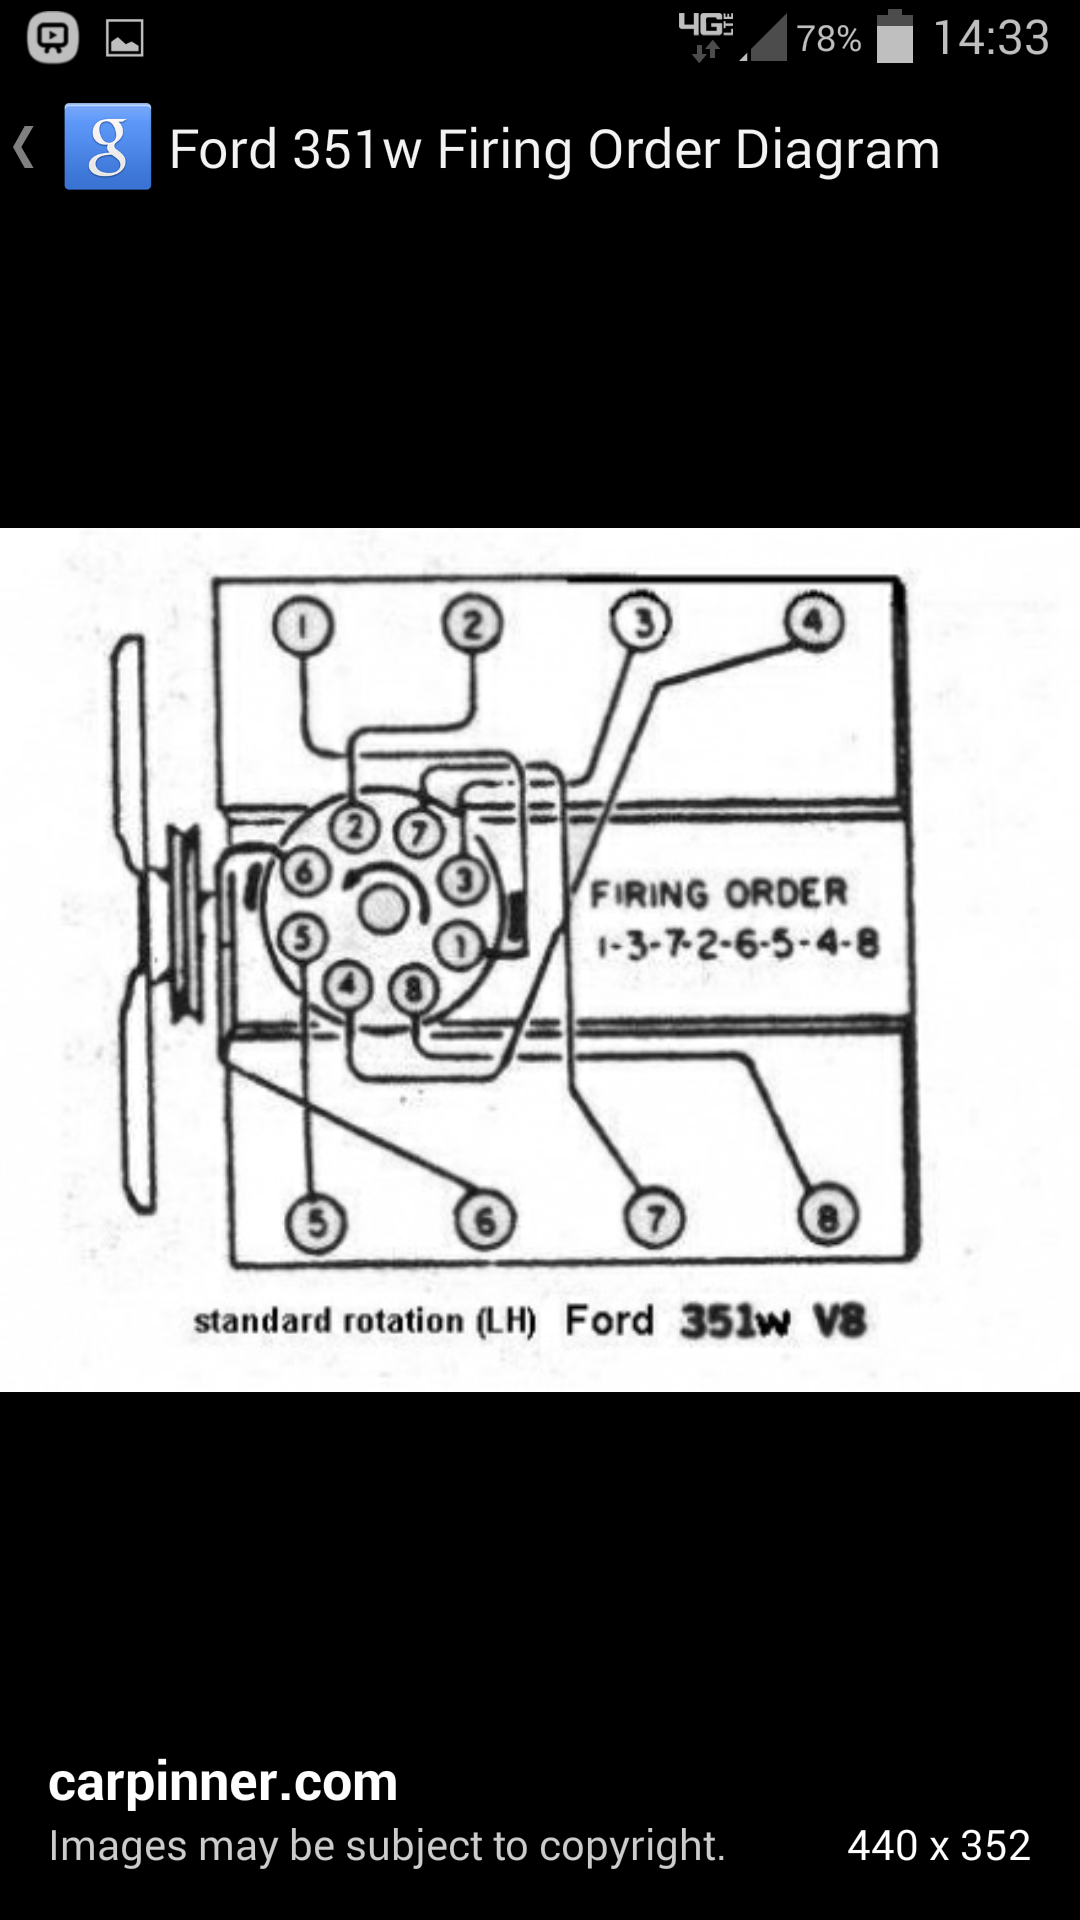 1989 Ford 351w Firing Order Wiring And Printable